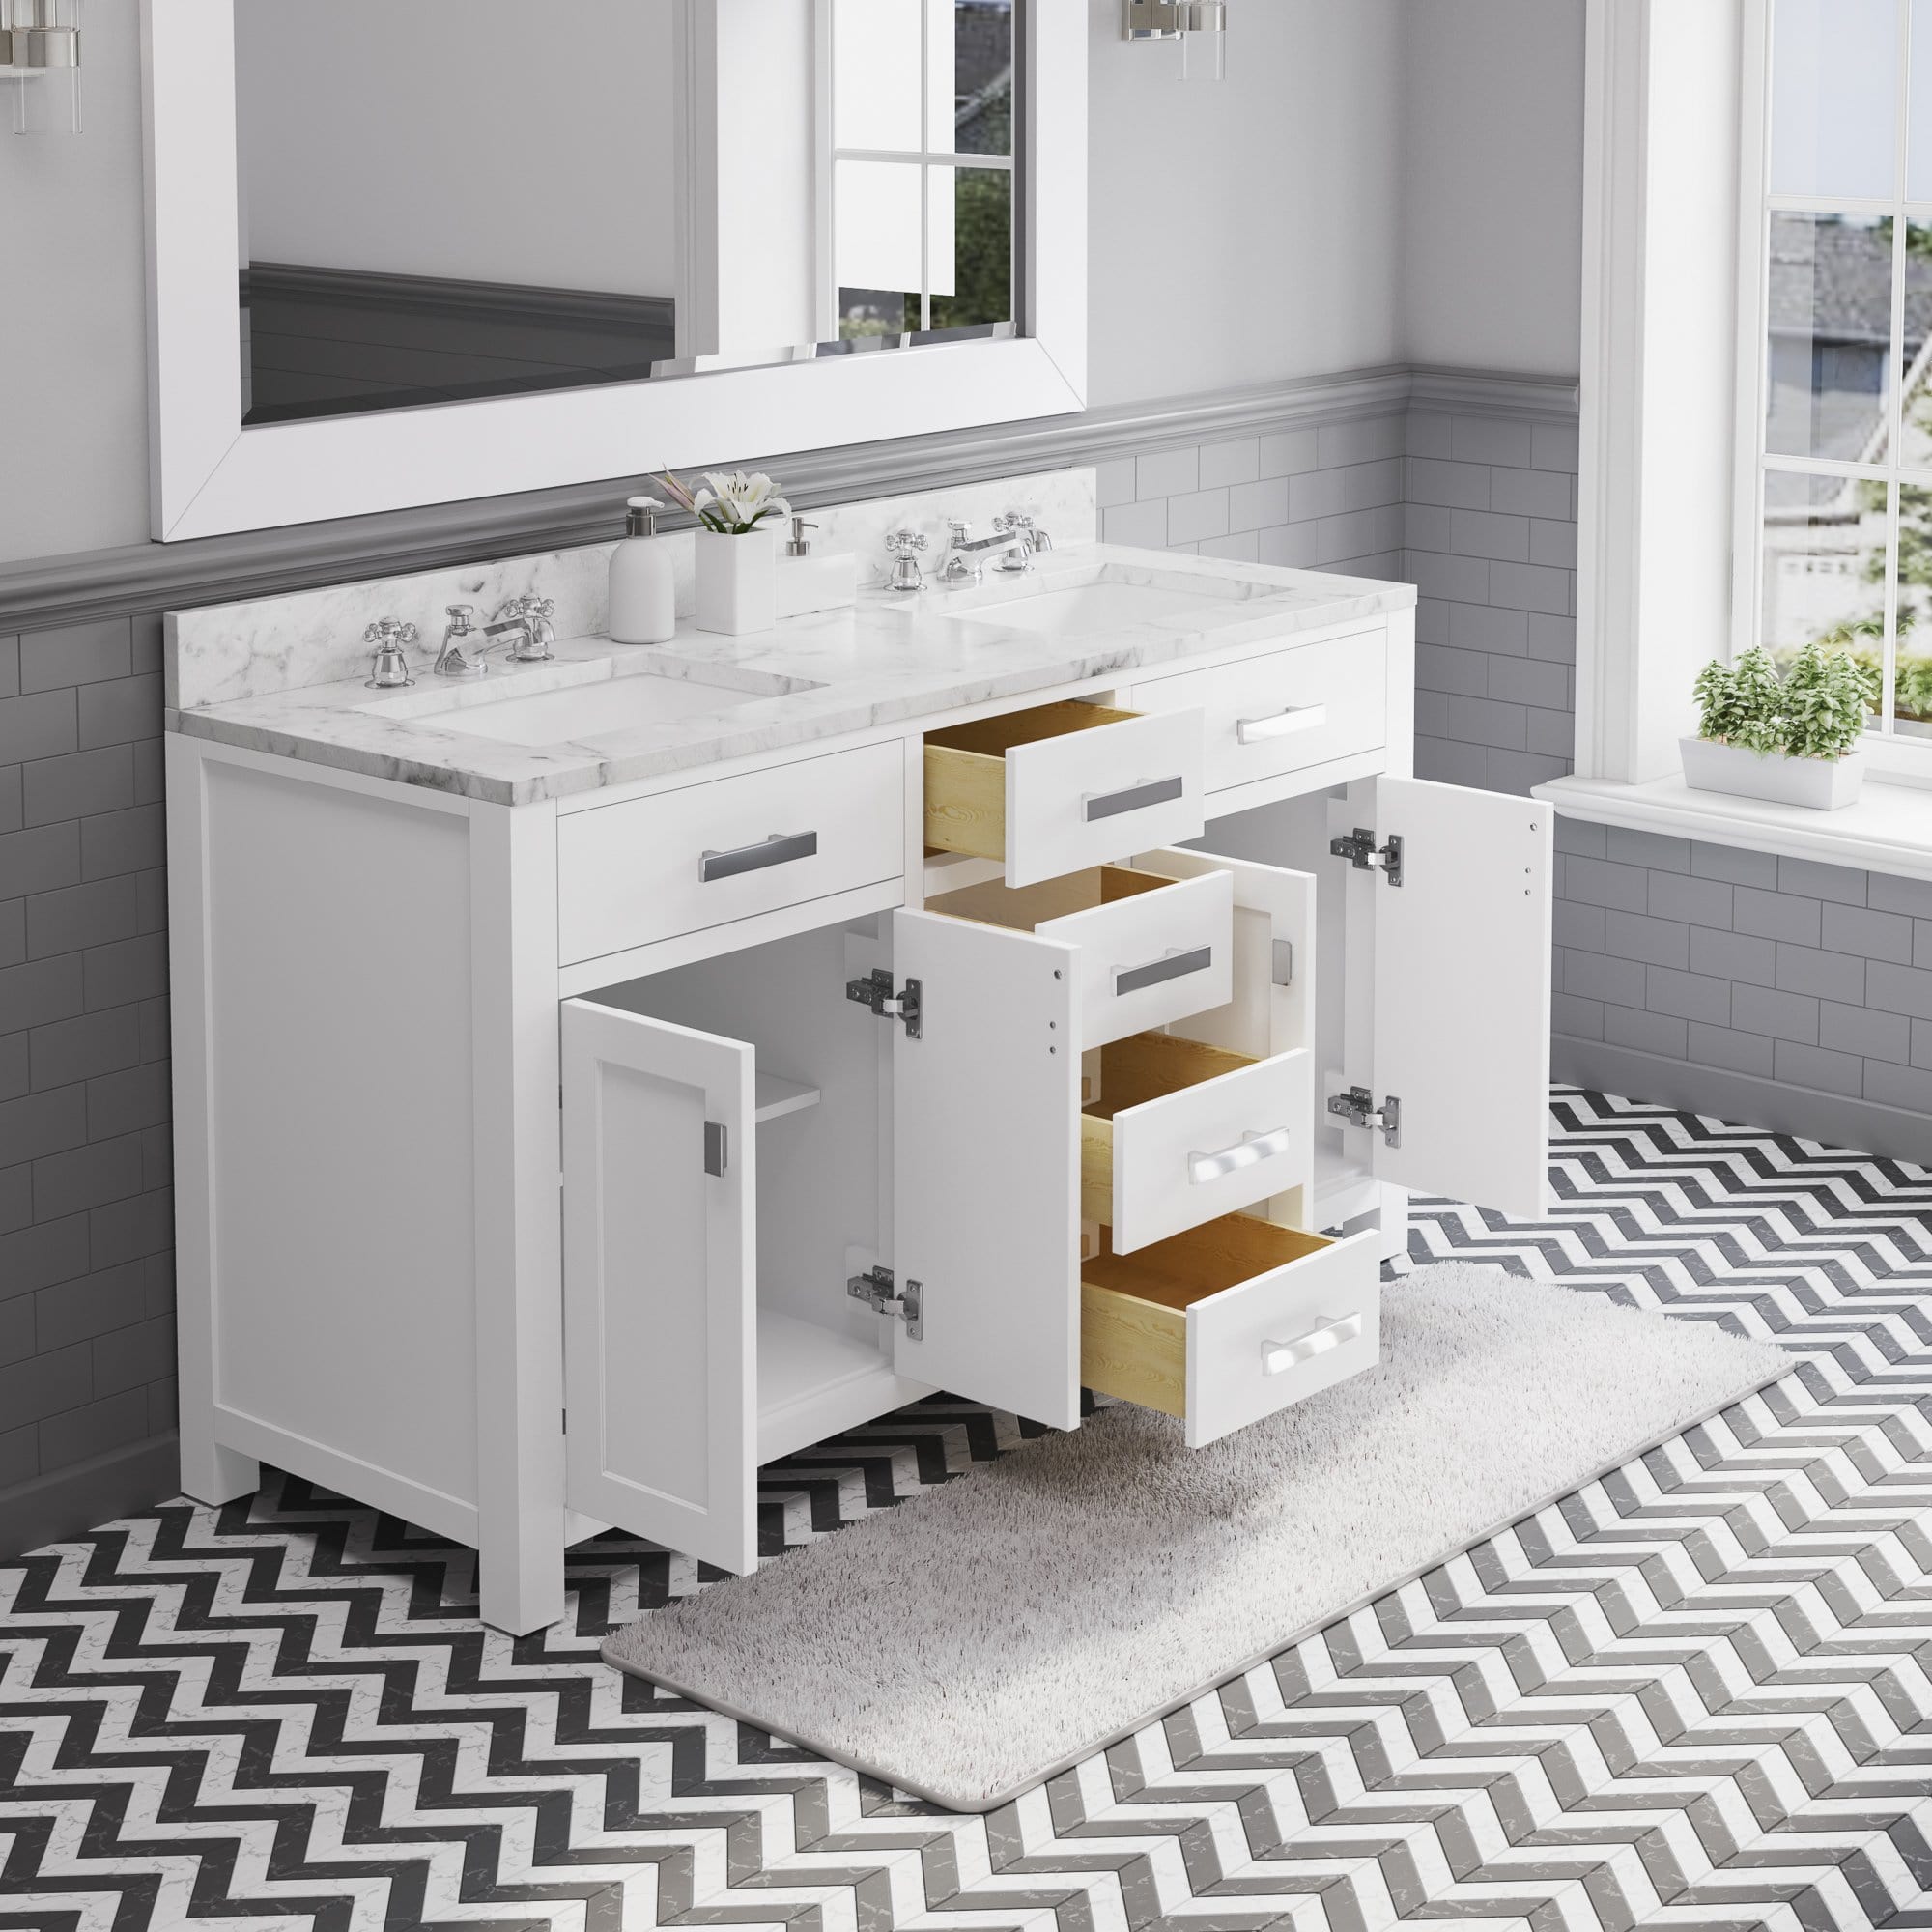 Water Creation 60 Inch Pure White Double Sink Bathroom Vanity With Matching Framed Mirror From The Madison Collection - Molaix700621682417Bathroom vanityMS60CW01PW-R60000000